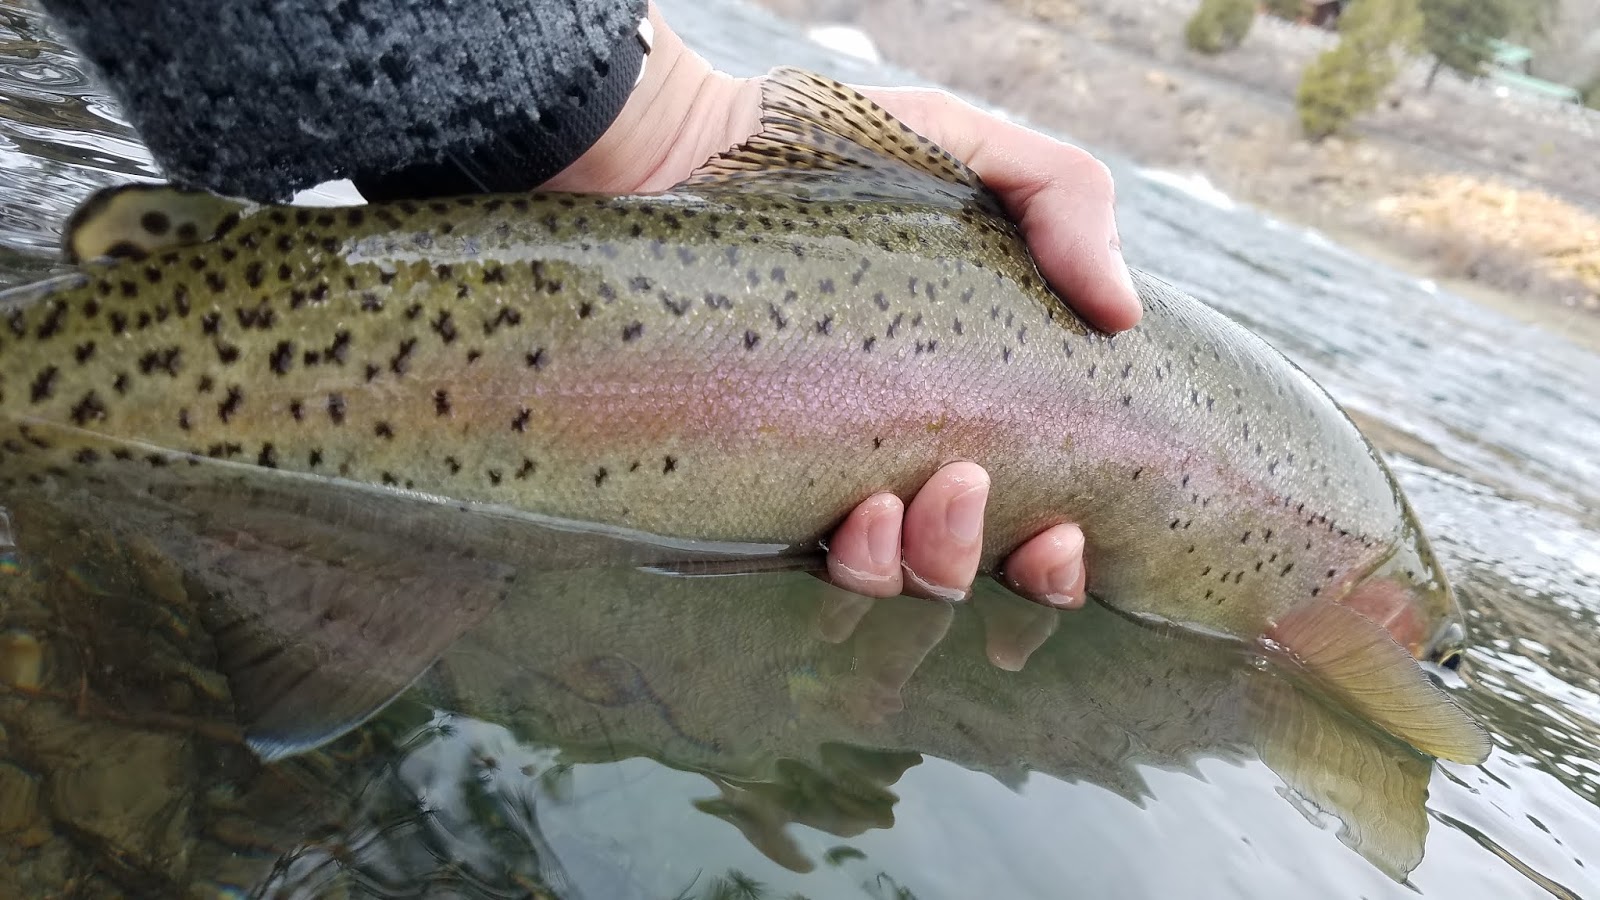 Finding Chunks During High Truckee Flows